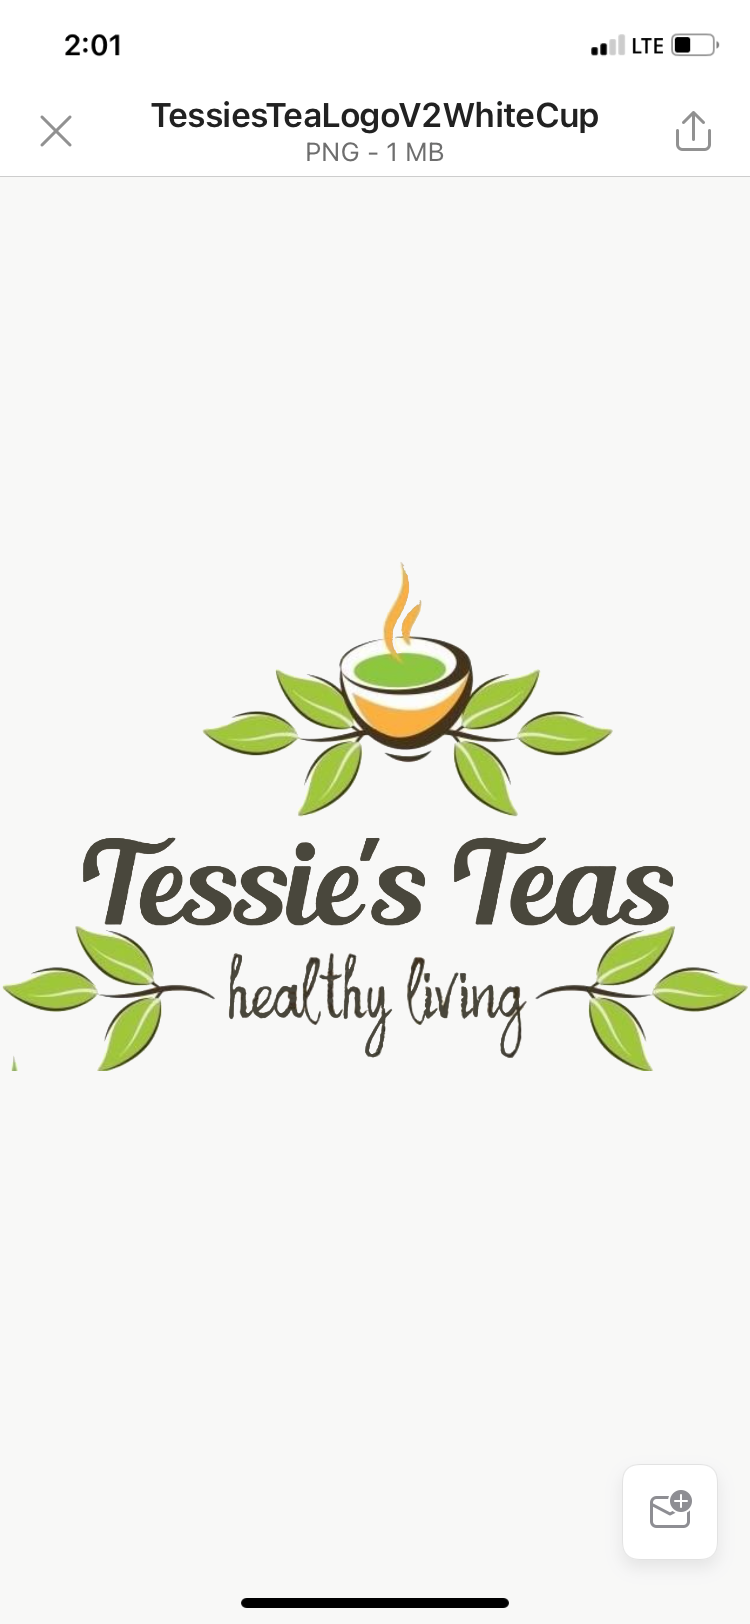 Tessie's Monthly Tea Club - 2 Boxes (Registered Auto-Ship Subscribers) Save $120 per year